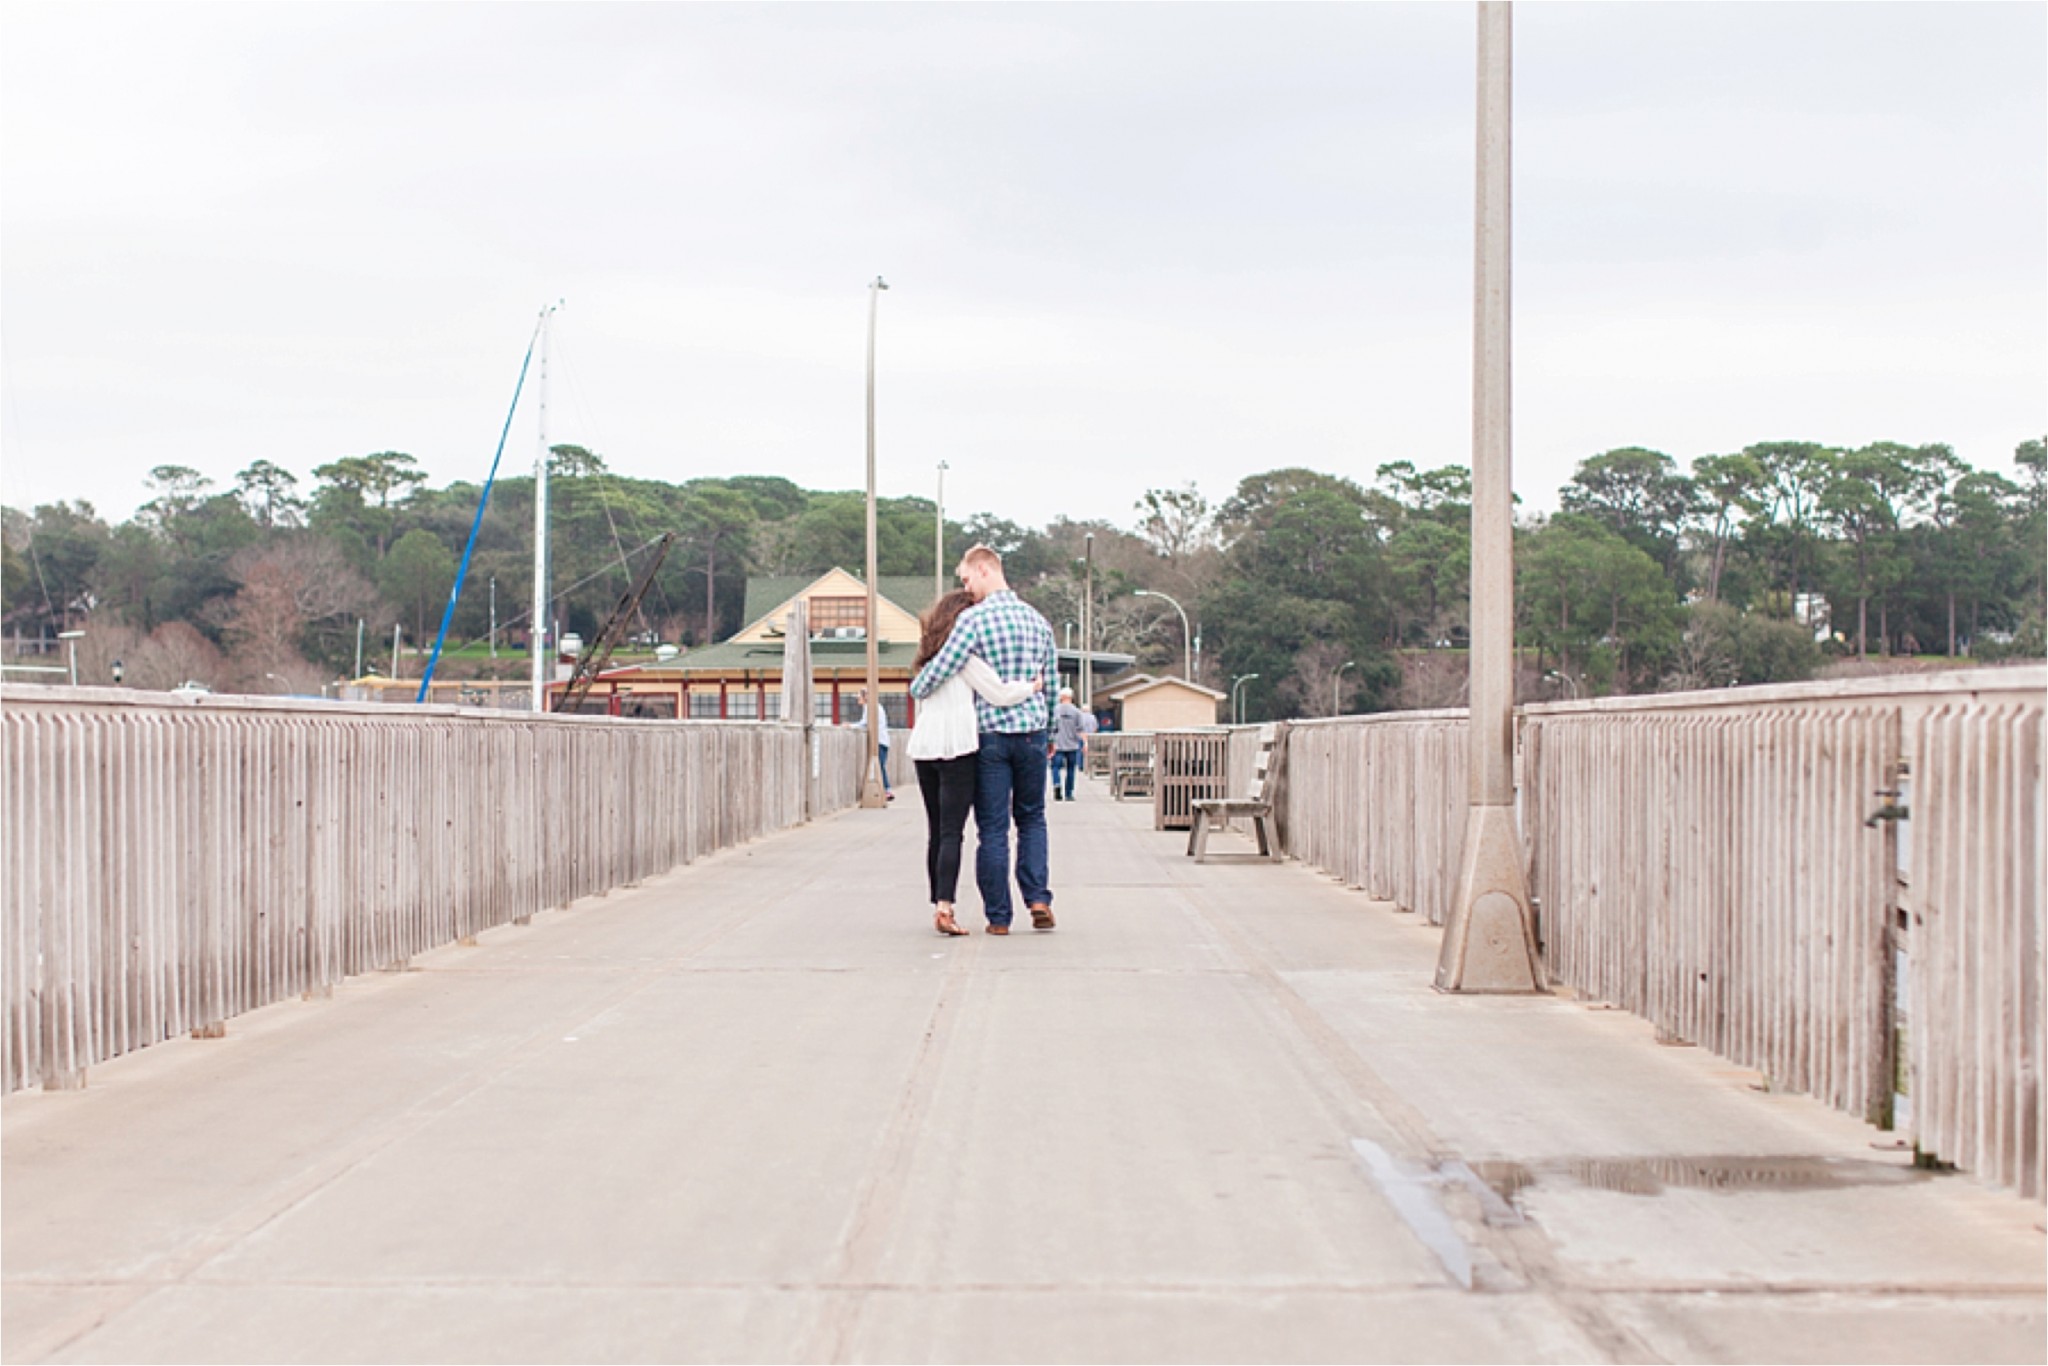 Missy_Eric_Proposal_at_the_Fairhope_pier_Alabama-157